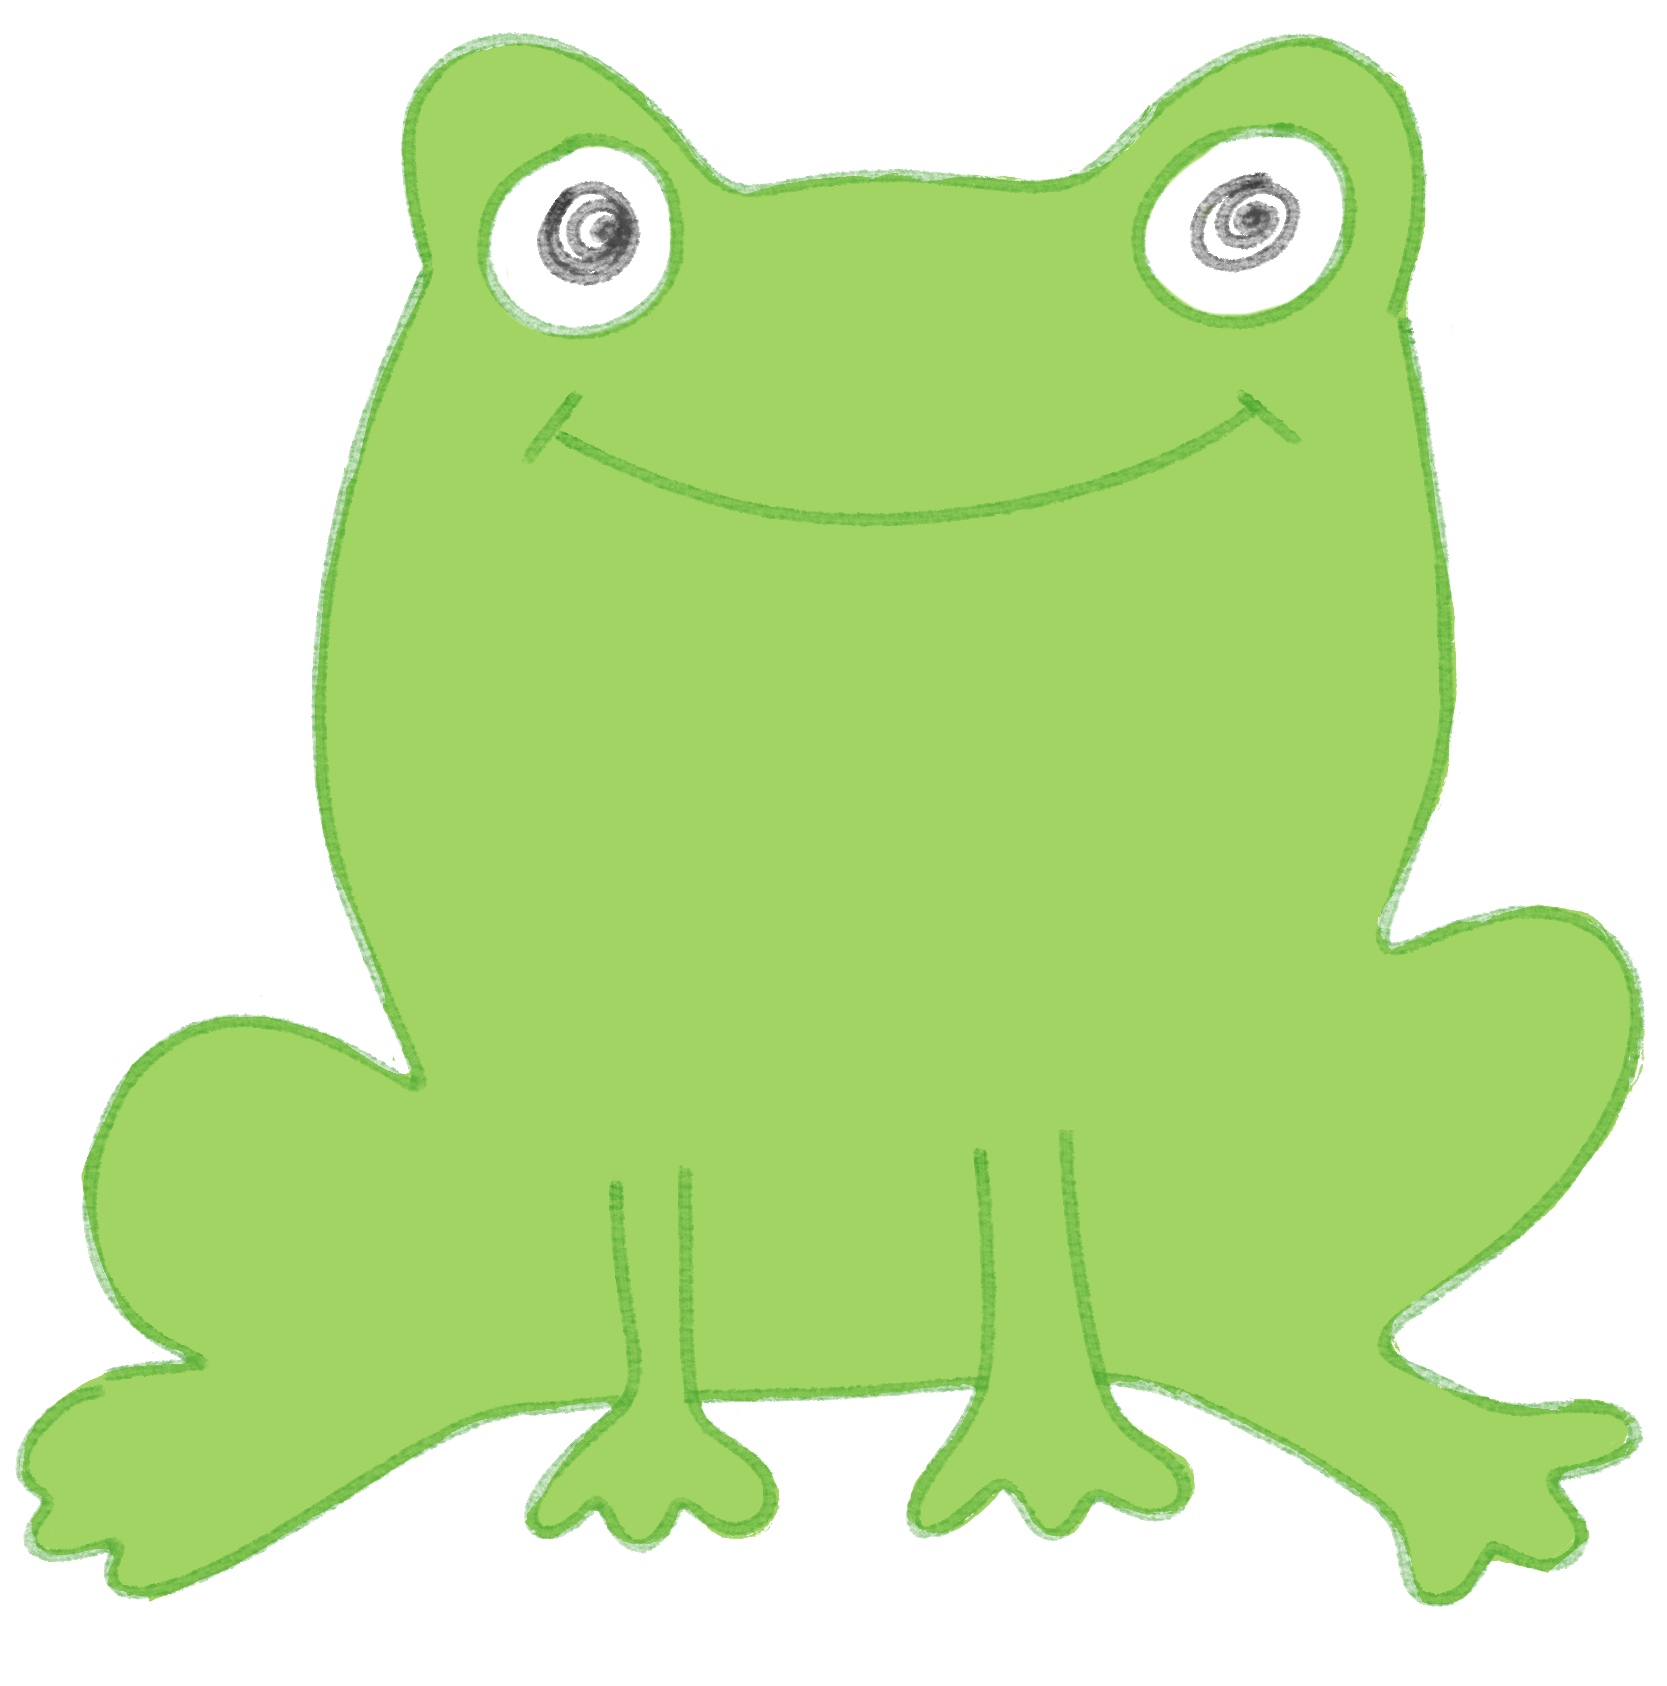 A cartoonish green frog with swirls for eyes smiling.